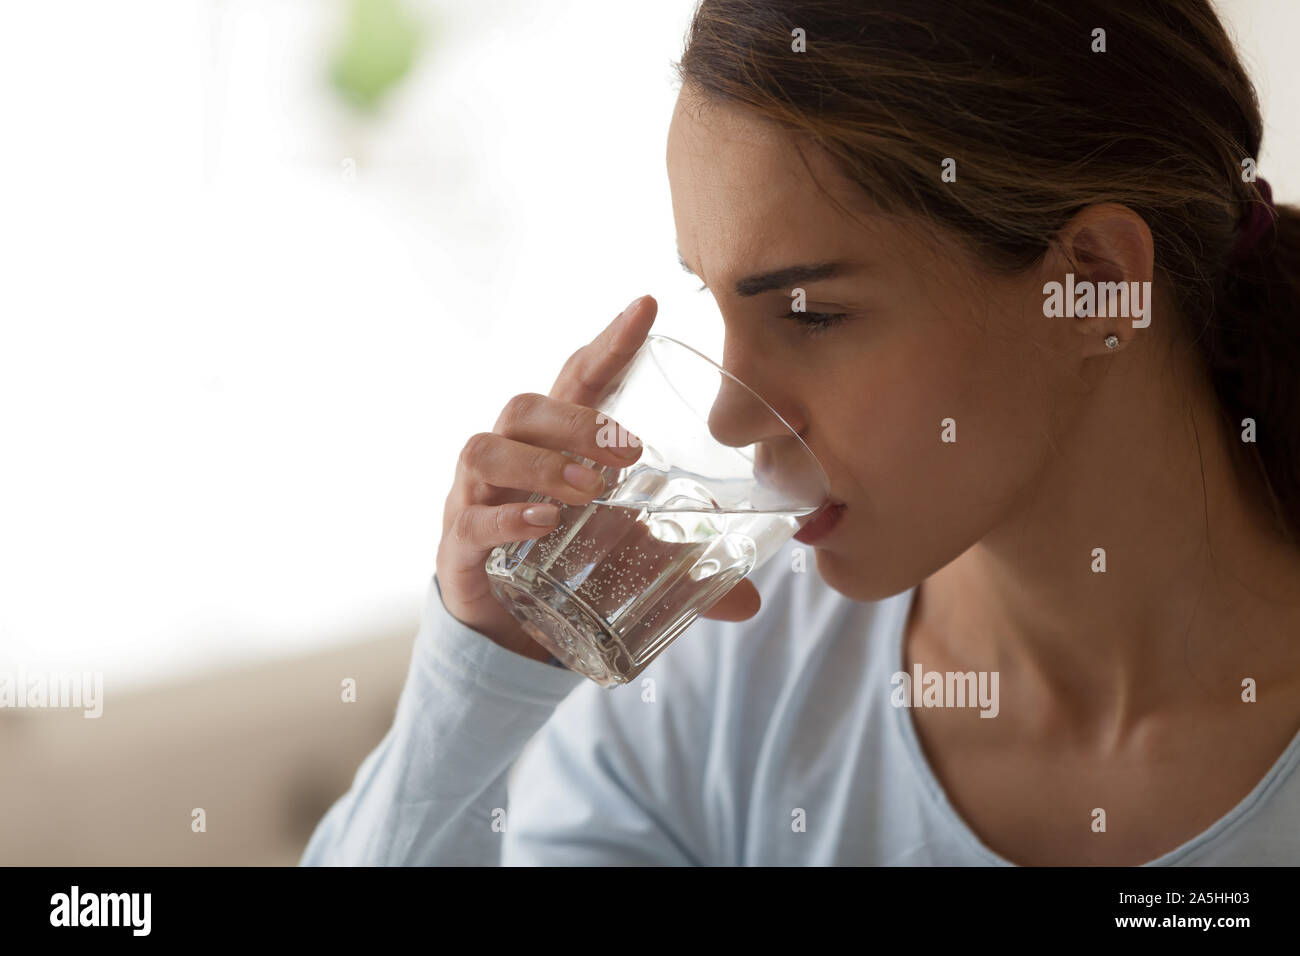 Close up young mixed race woman drinking glass of water. Stock Photo